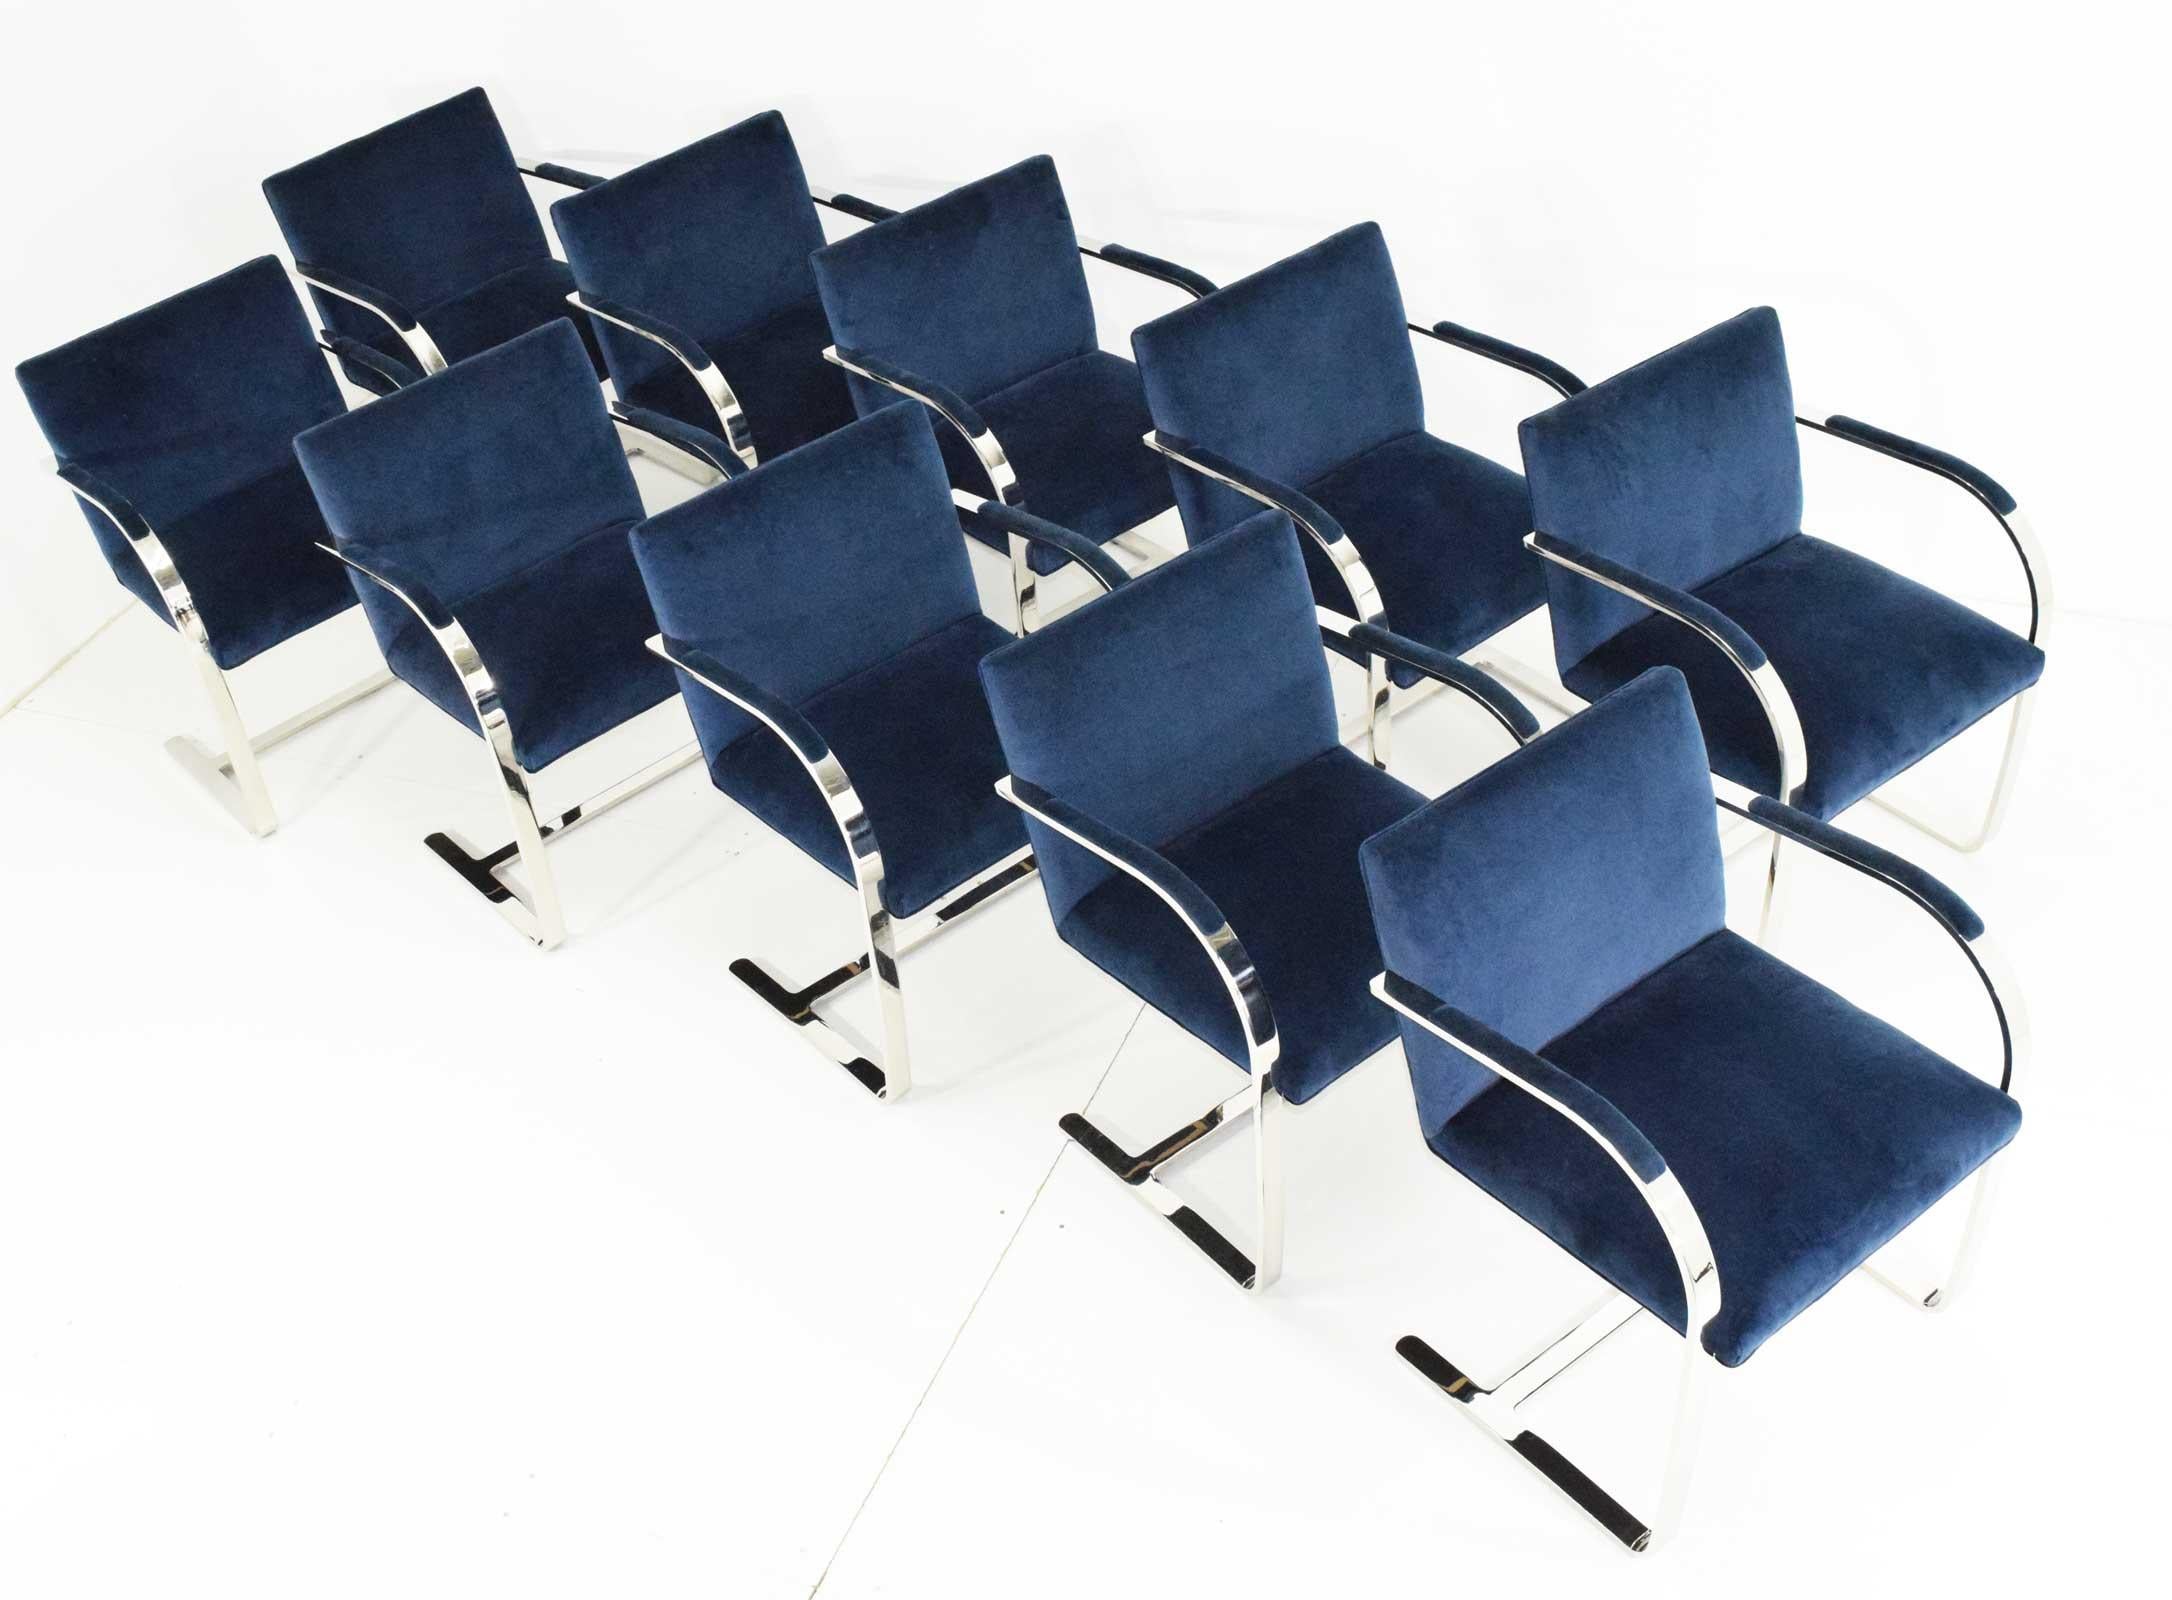 Beautiful set of ten Brno chairs designed by Mies van der Rohe. Chairs are upholstered in a blue velvet. They show wonderfully. Chairs are stainless steel and include the padded arms. 

Chairs are ready to go just in time for the holidays. 

We